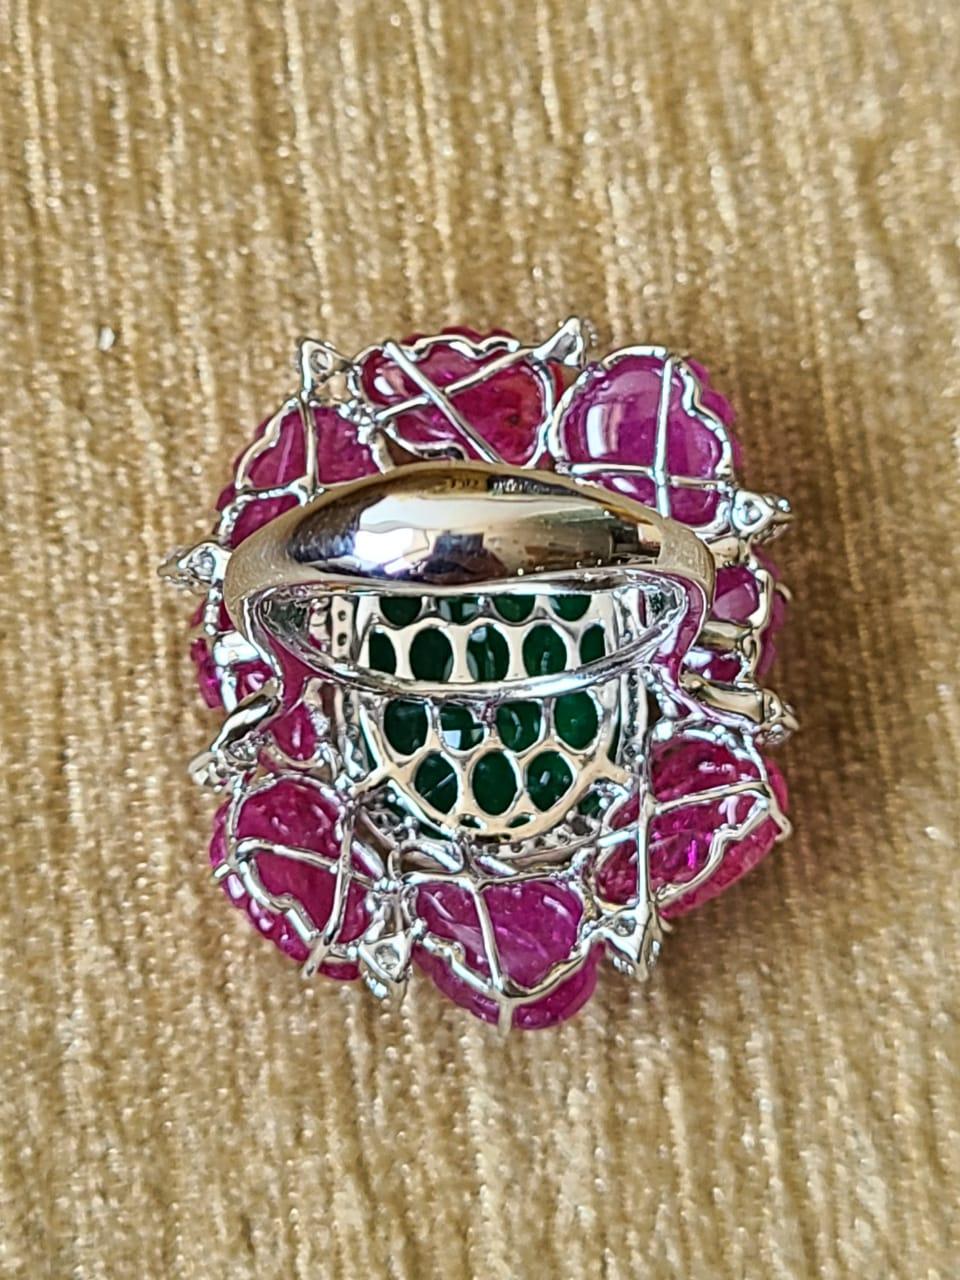 pachu stone ring in which finger